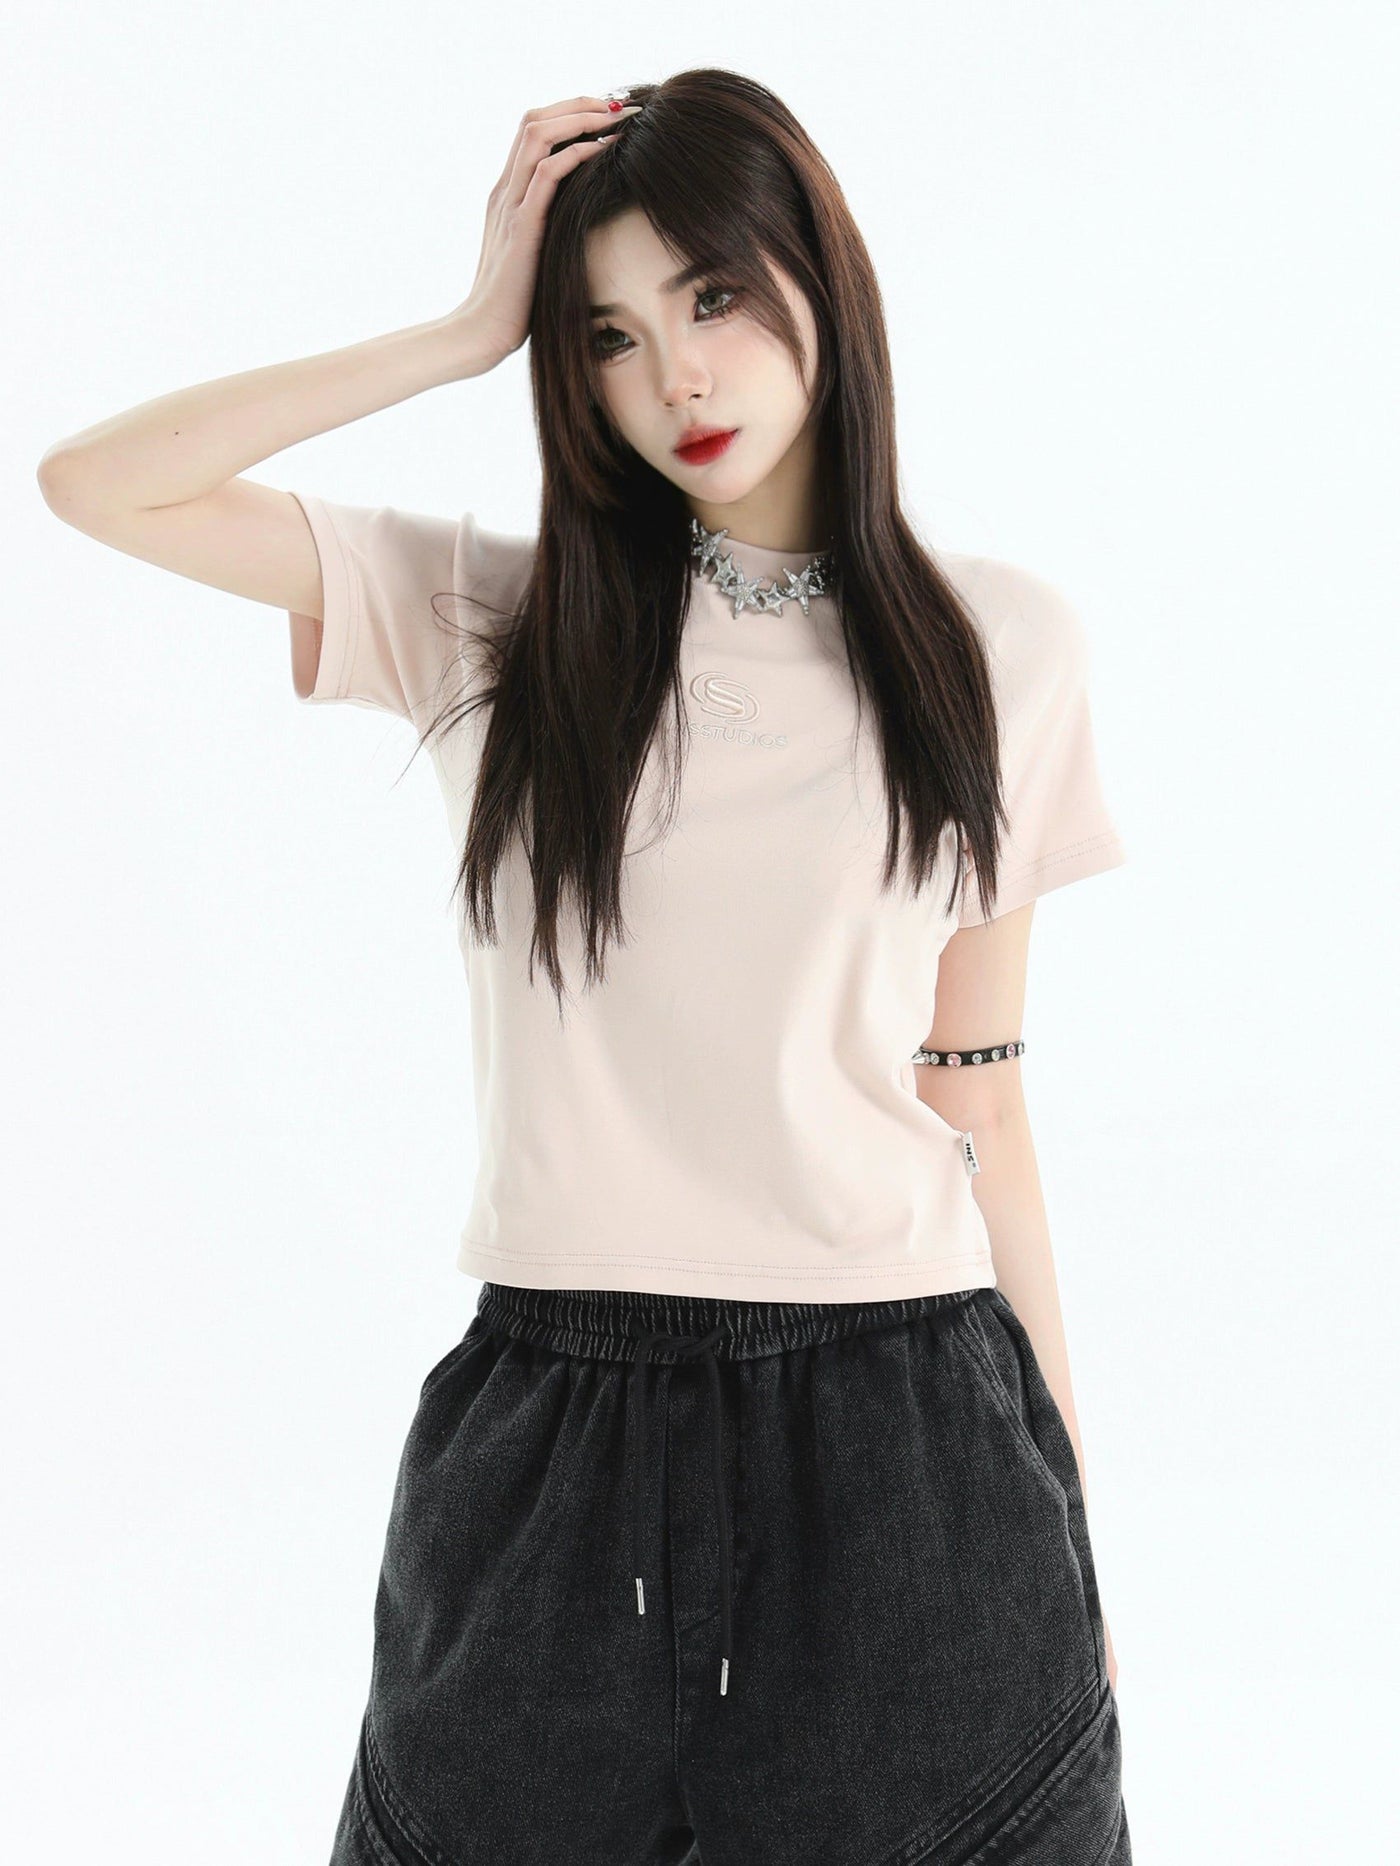 Embroidered Logo Casual T-Shirt Korean Street Fashion T-Shirt By INS Korea Shop Online at OH Vault